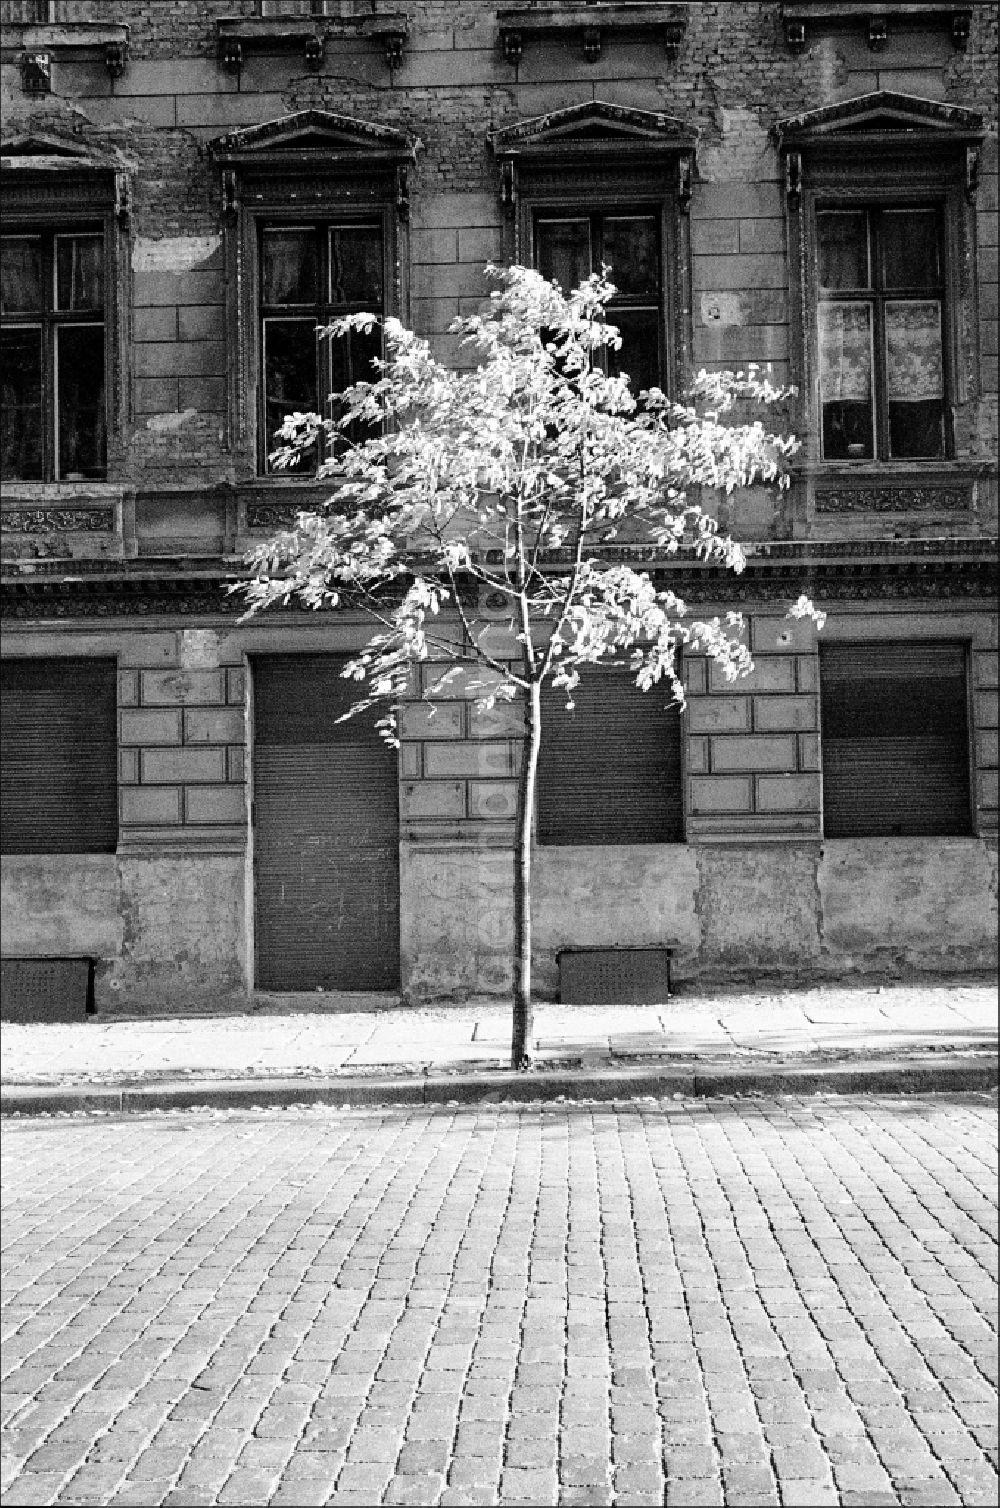 GDR image archive: Berlin - Decaying plaster and masonry areas on the facade with a flowering tree as a contrast in the Prezlauer Berg district in Berlin East Berlin in the area of the former GDR, German Democratic Republic